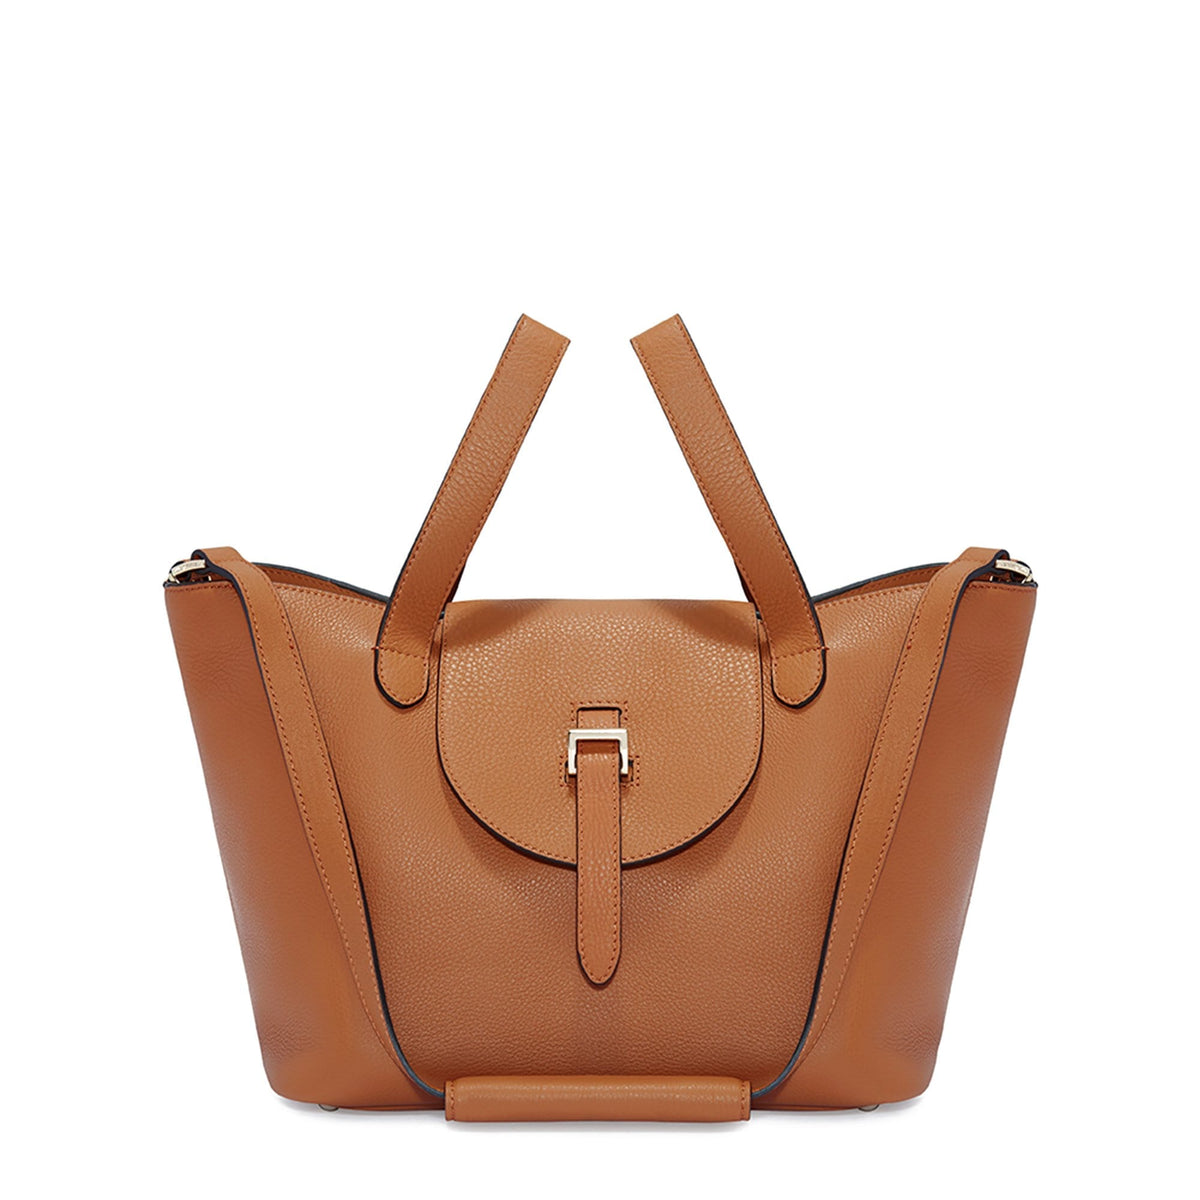 Leather bag Meli Melo Brown in Leather - 10539284